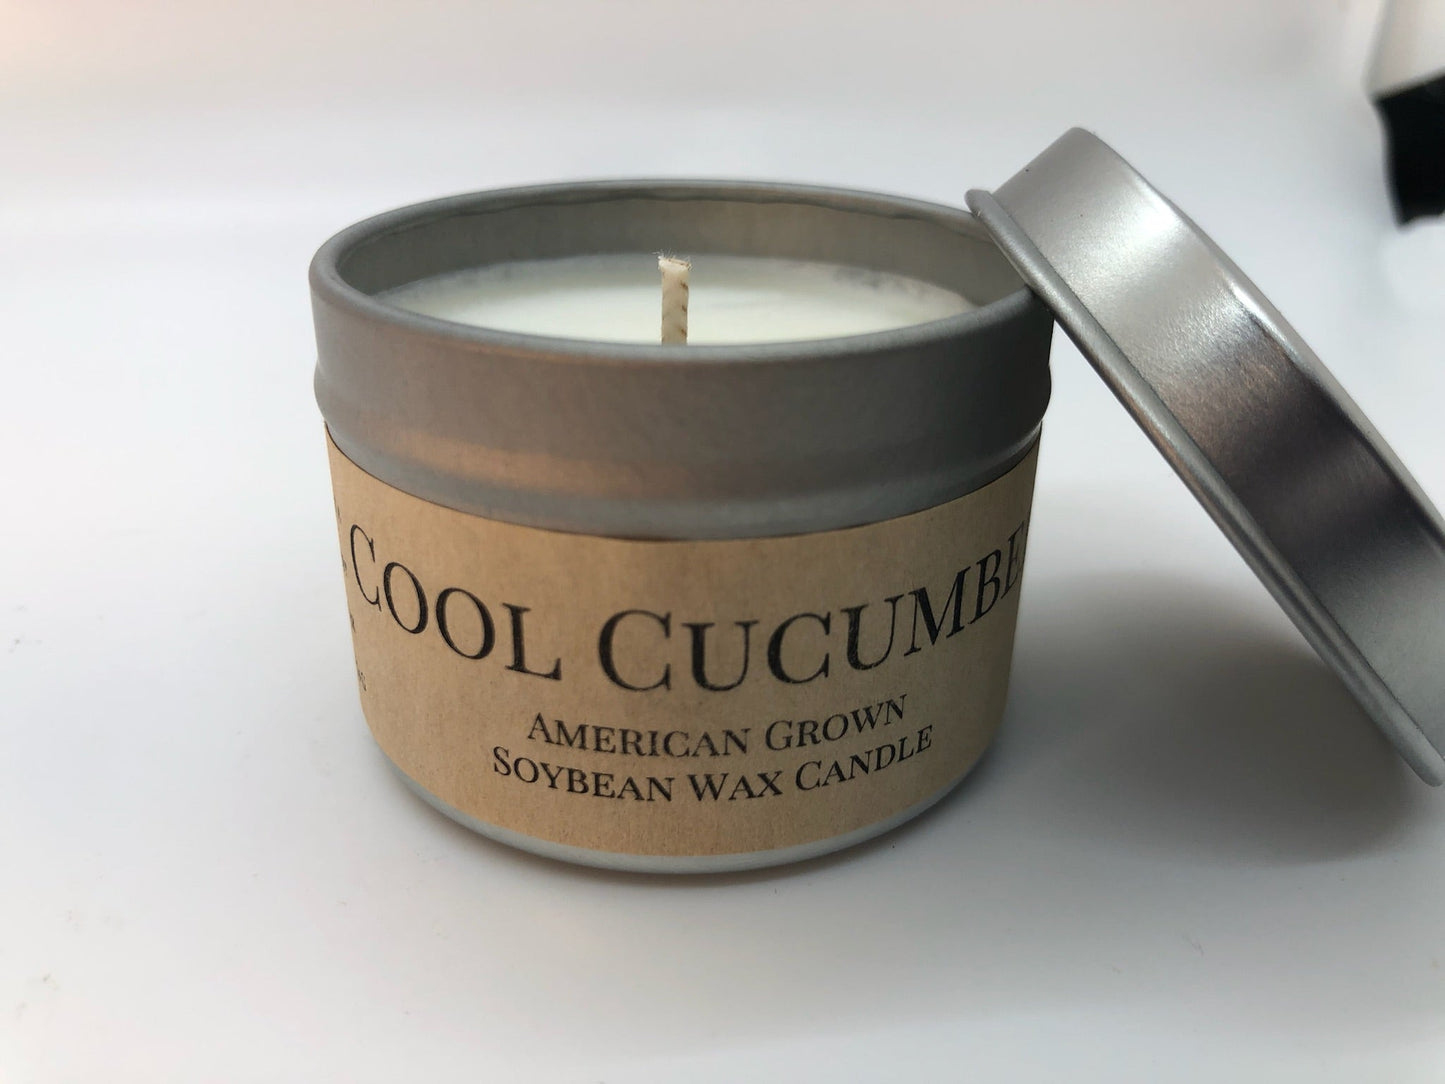 Cool Cucumber Soy Candle | 2 oz Travel Tin